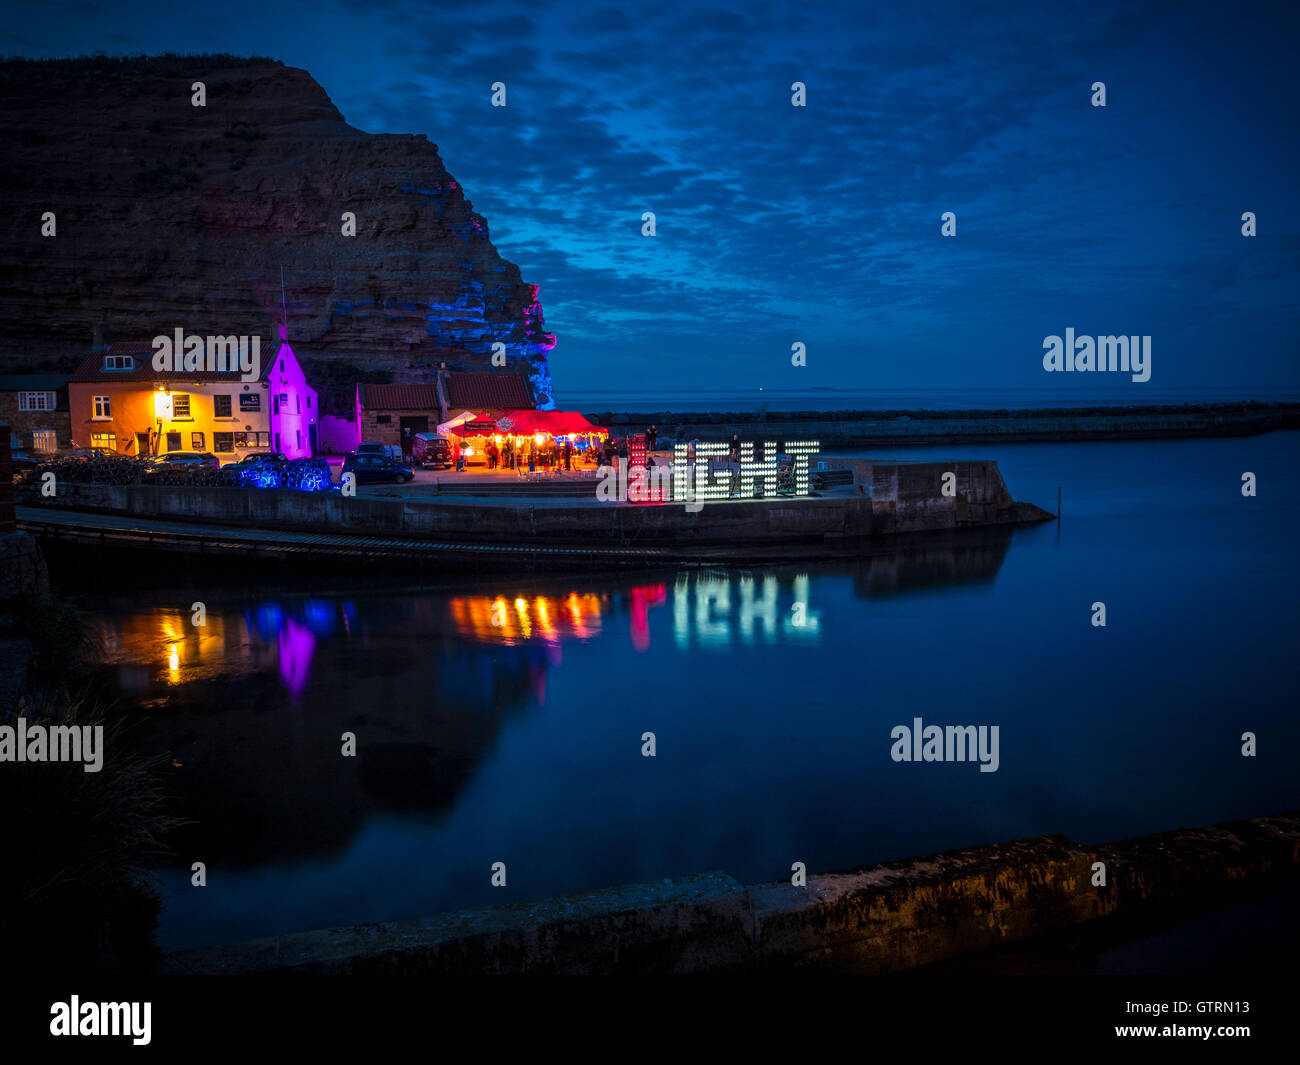 Staithes, UK. 10th September, 2016. After dark, light artist Mick Stephenson's LIGHT installation, made from lanterns, illuminates the quayside.  The Staithes Festival of Arts and Heritage features a selling exhibition of artwork over the weekend in temporary  galleries in cottages, houses and public spaces throughout the village. Photo Bailey-Cooper Photography/Alamy Live News. Stock Photo